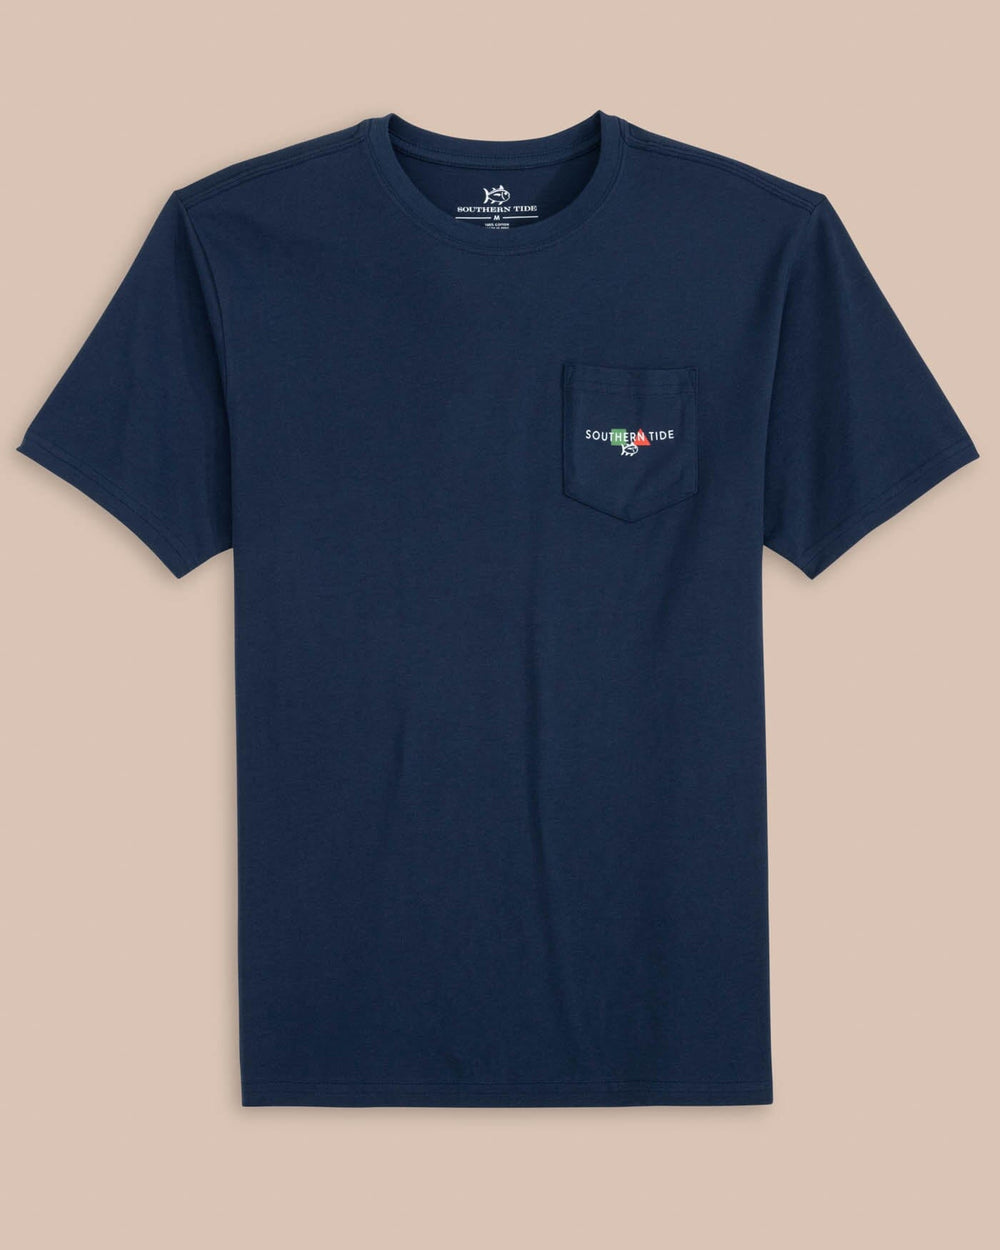 The front view of the Southern Tide Channel Marker Buoy Short Sleeve T-Shirt by Southern Tide - Navy